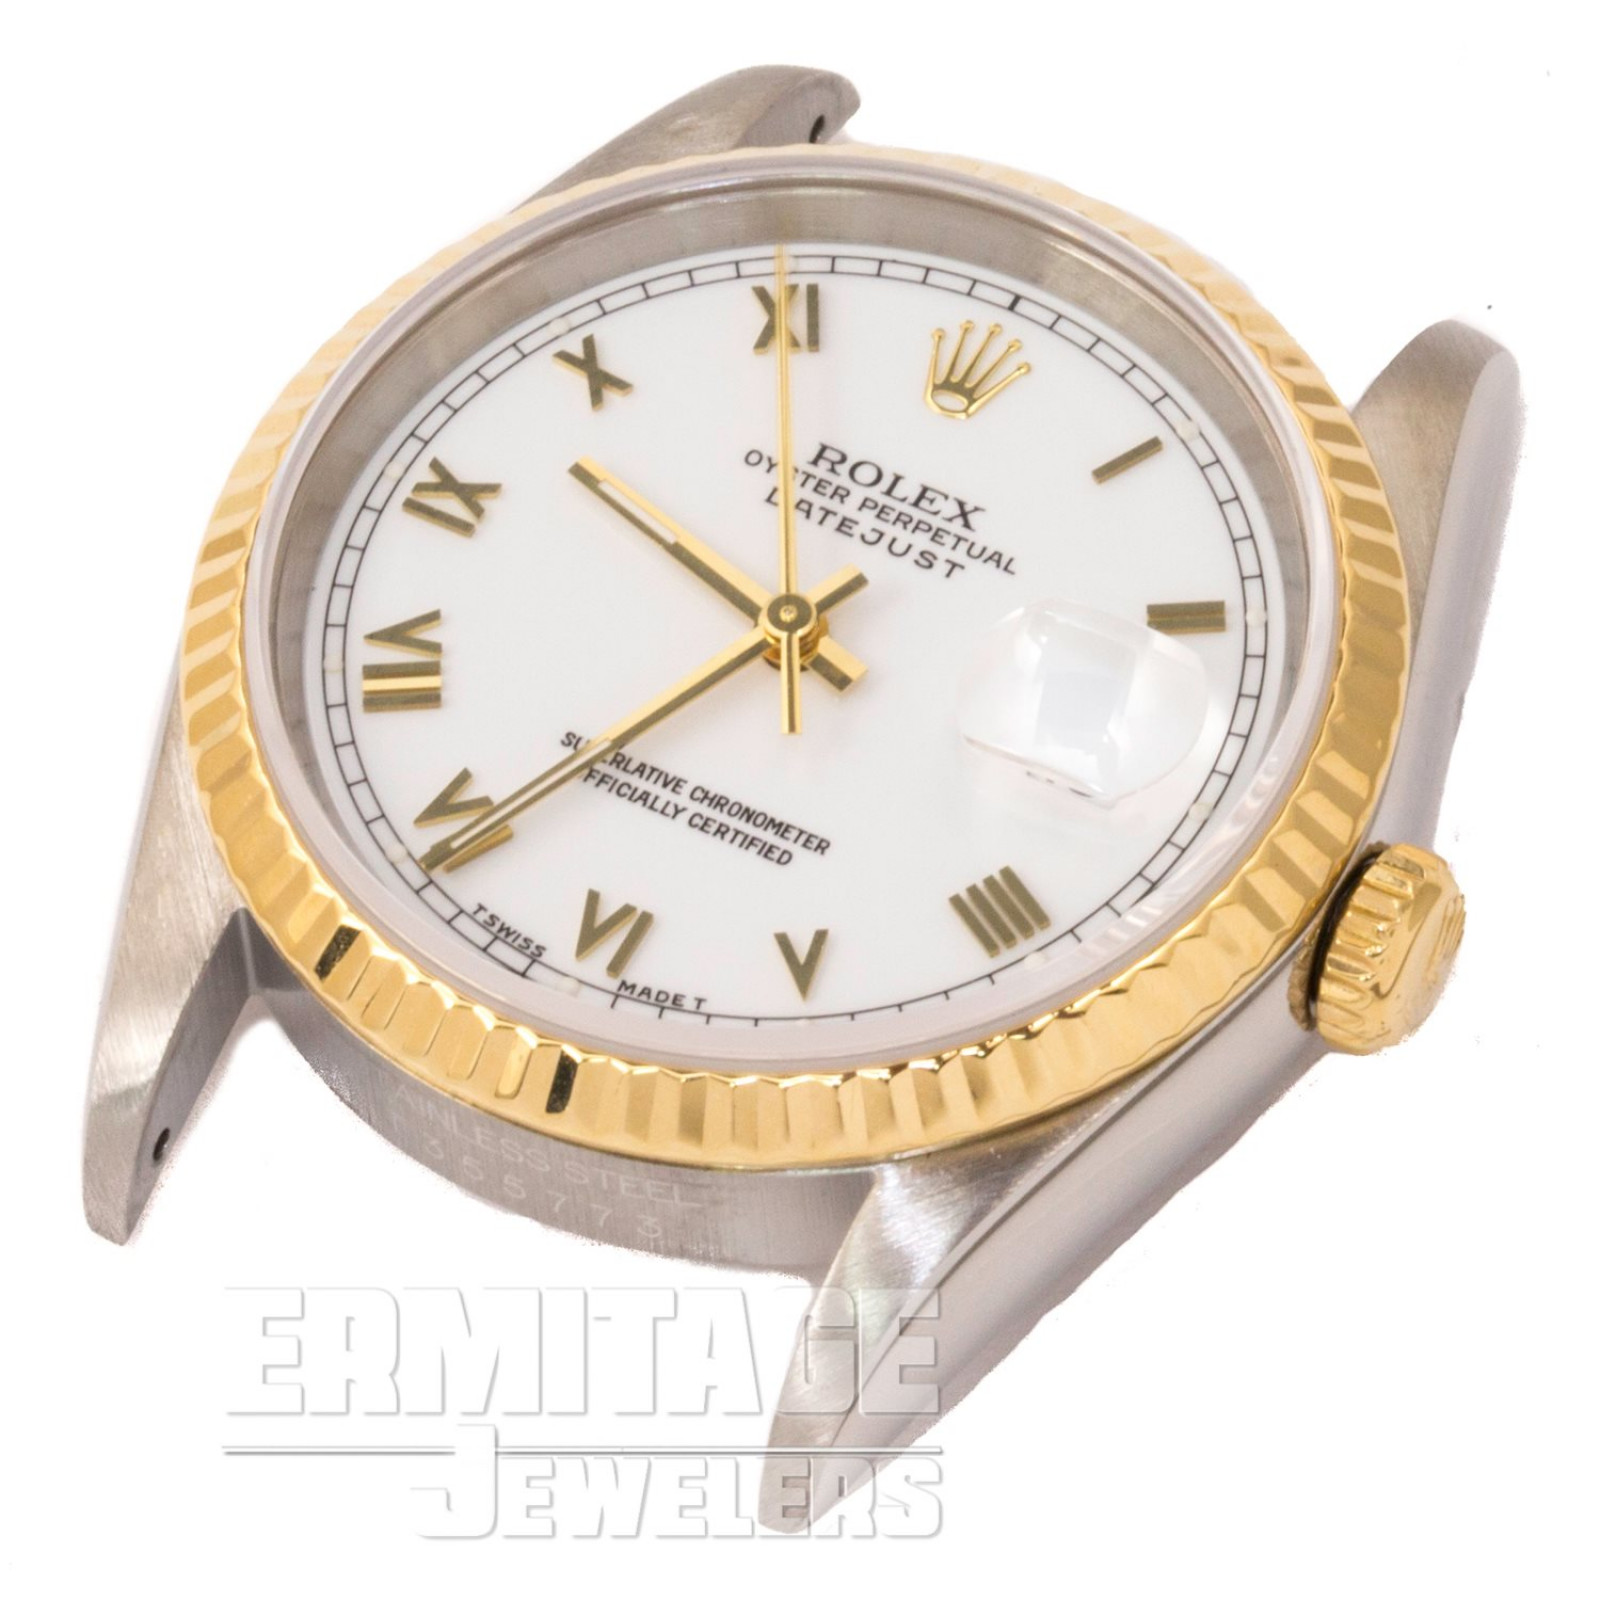 Two Tone Rolex Datejust 16233 with White Dial